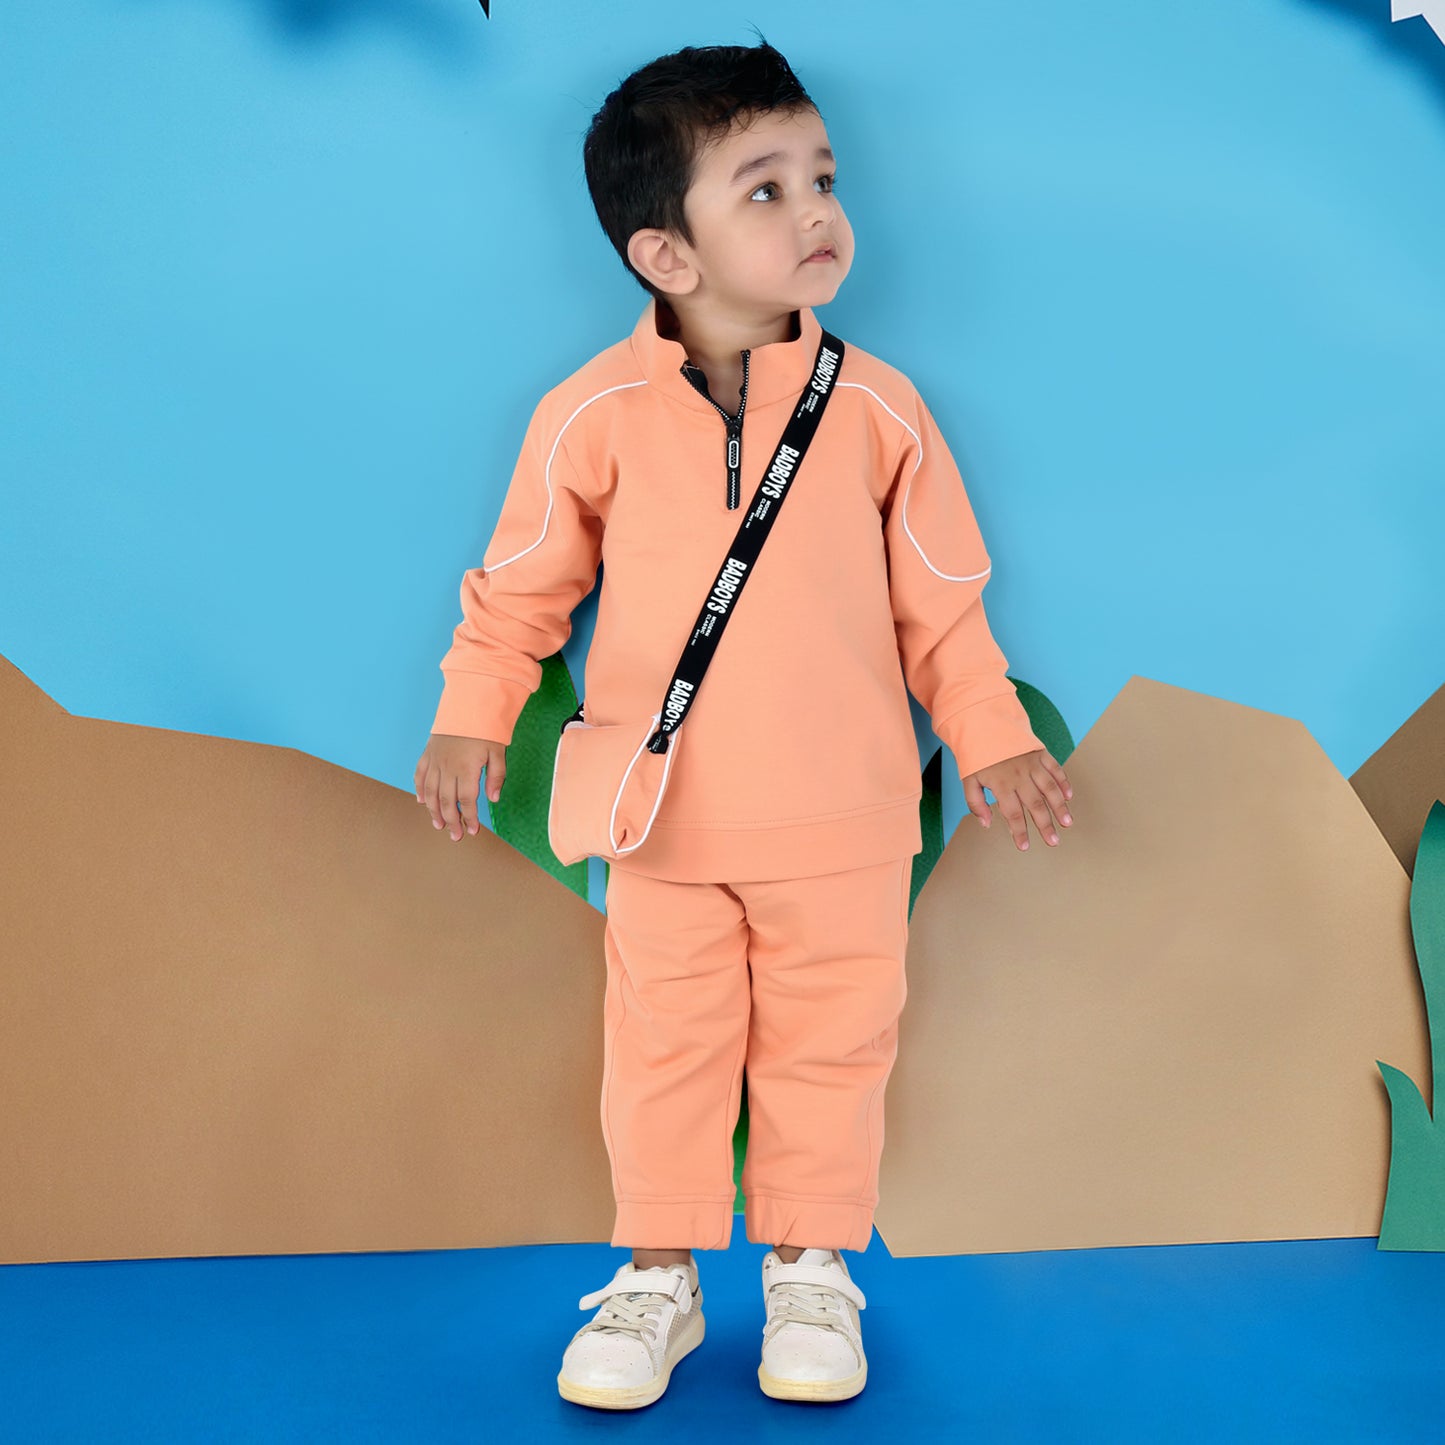 Cotton Comfort Quest: Boys' Coordinated Set with Super Cool Bag!